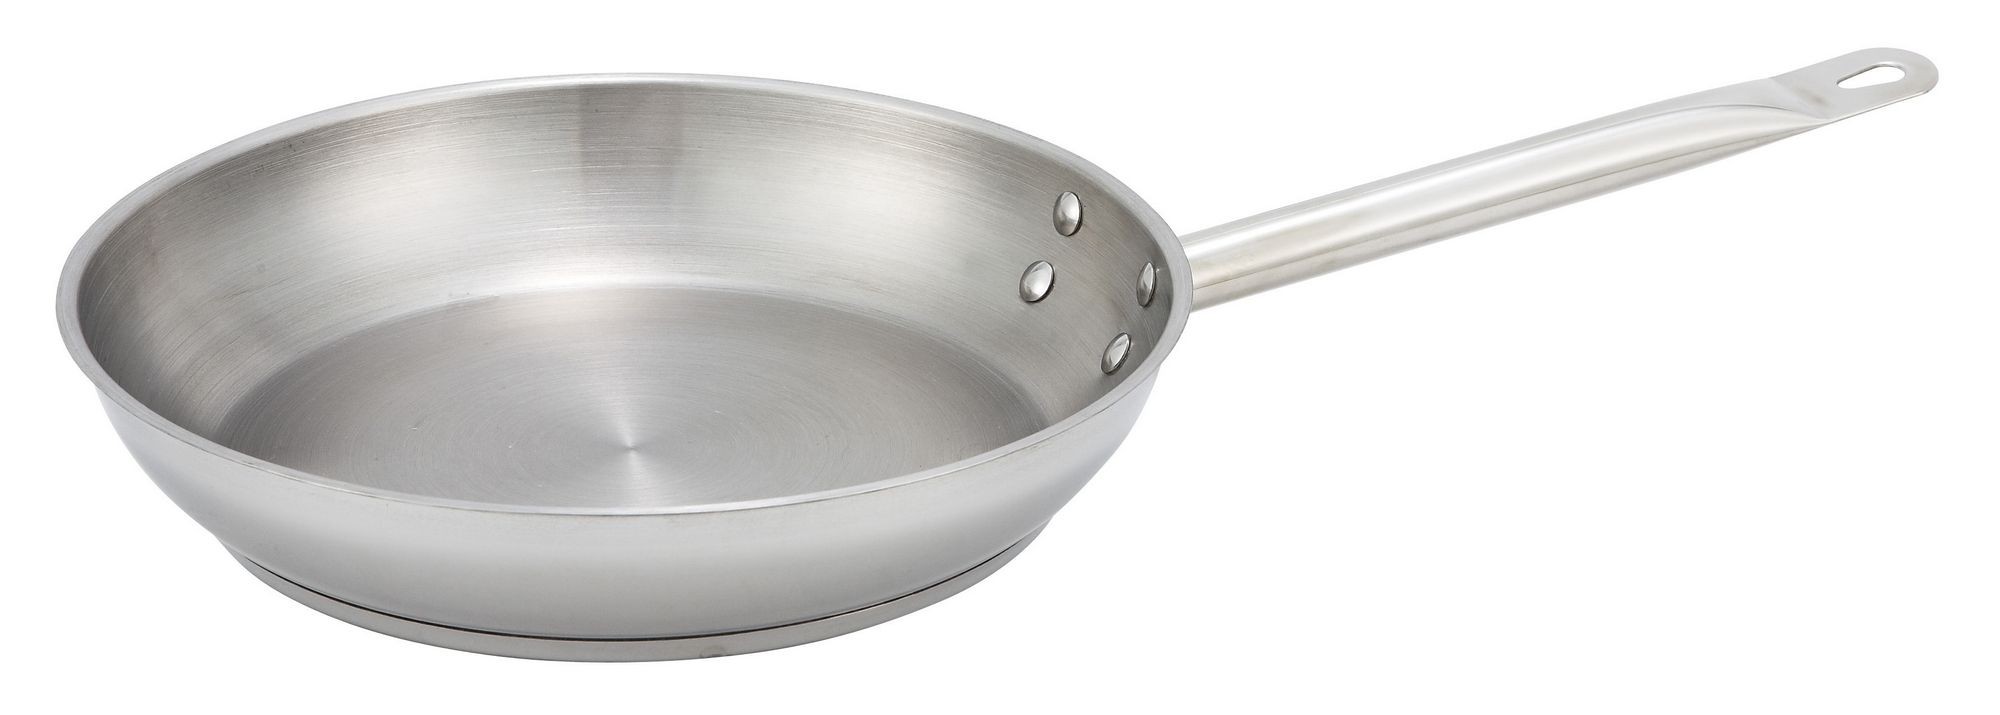 Winco SSFP-11 Stainless Steel Induction Fry Pan 11"